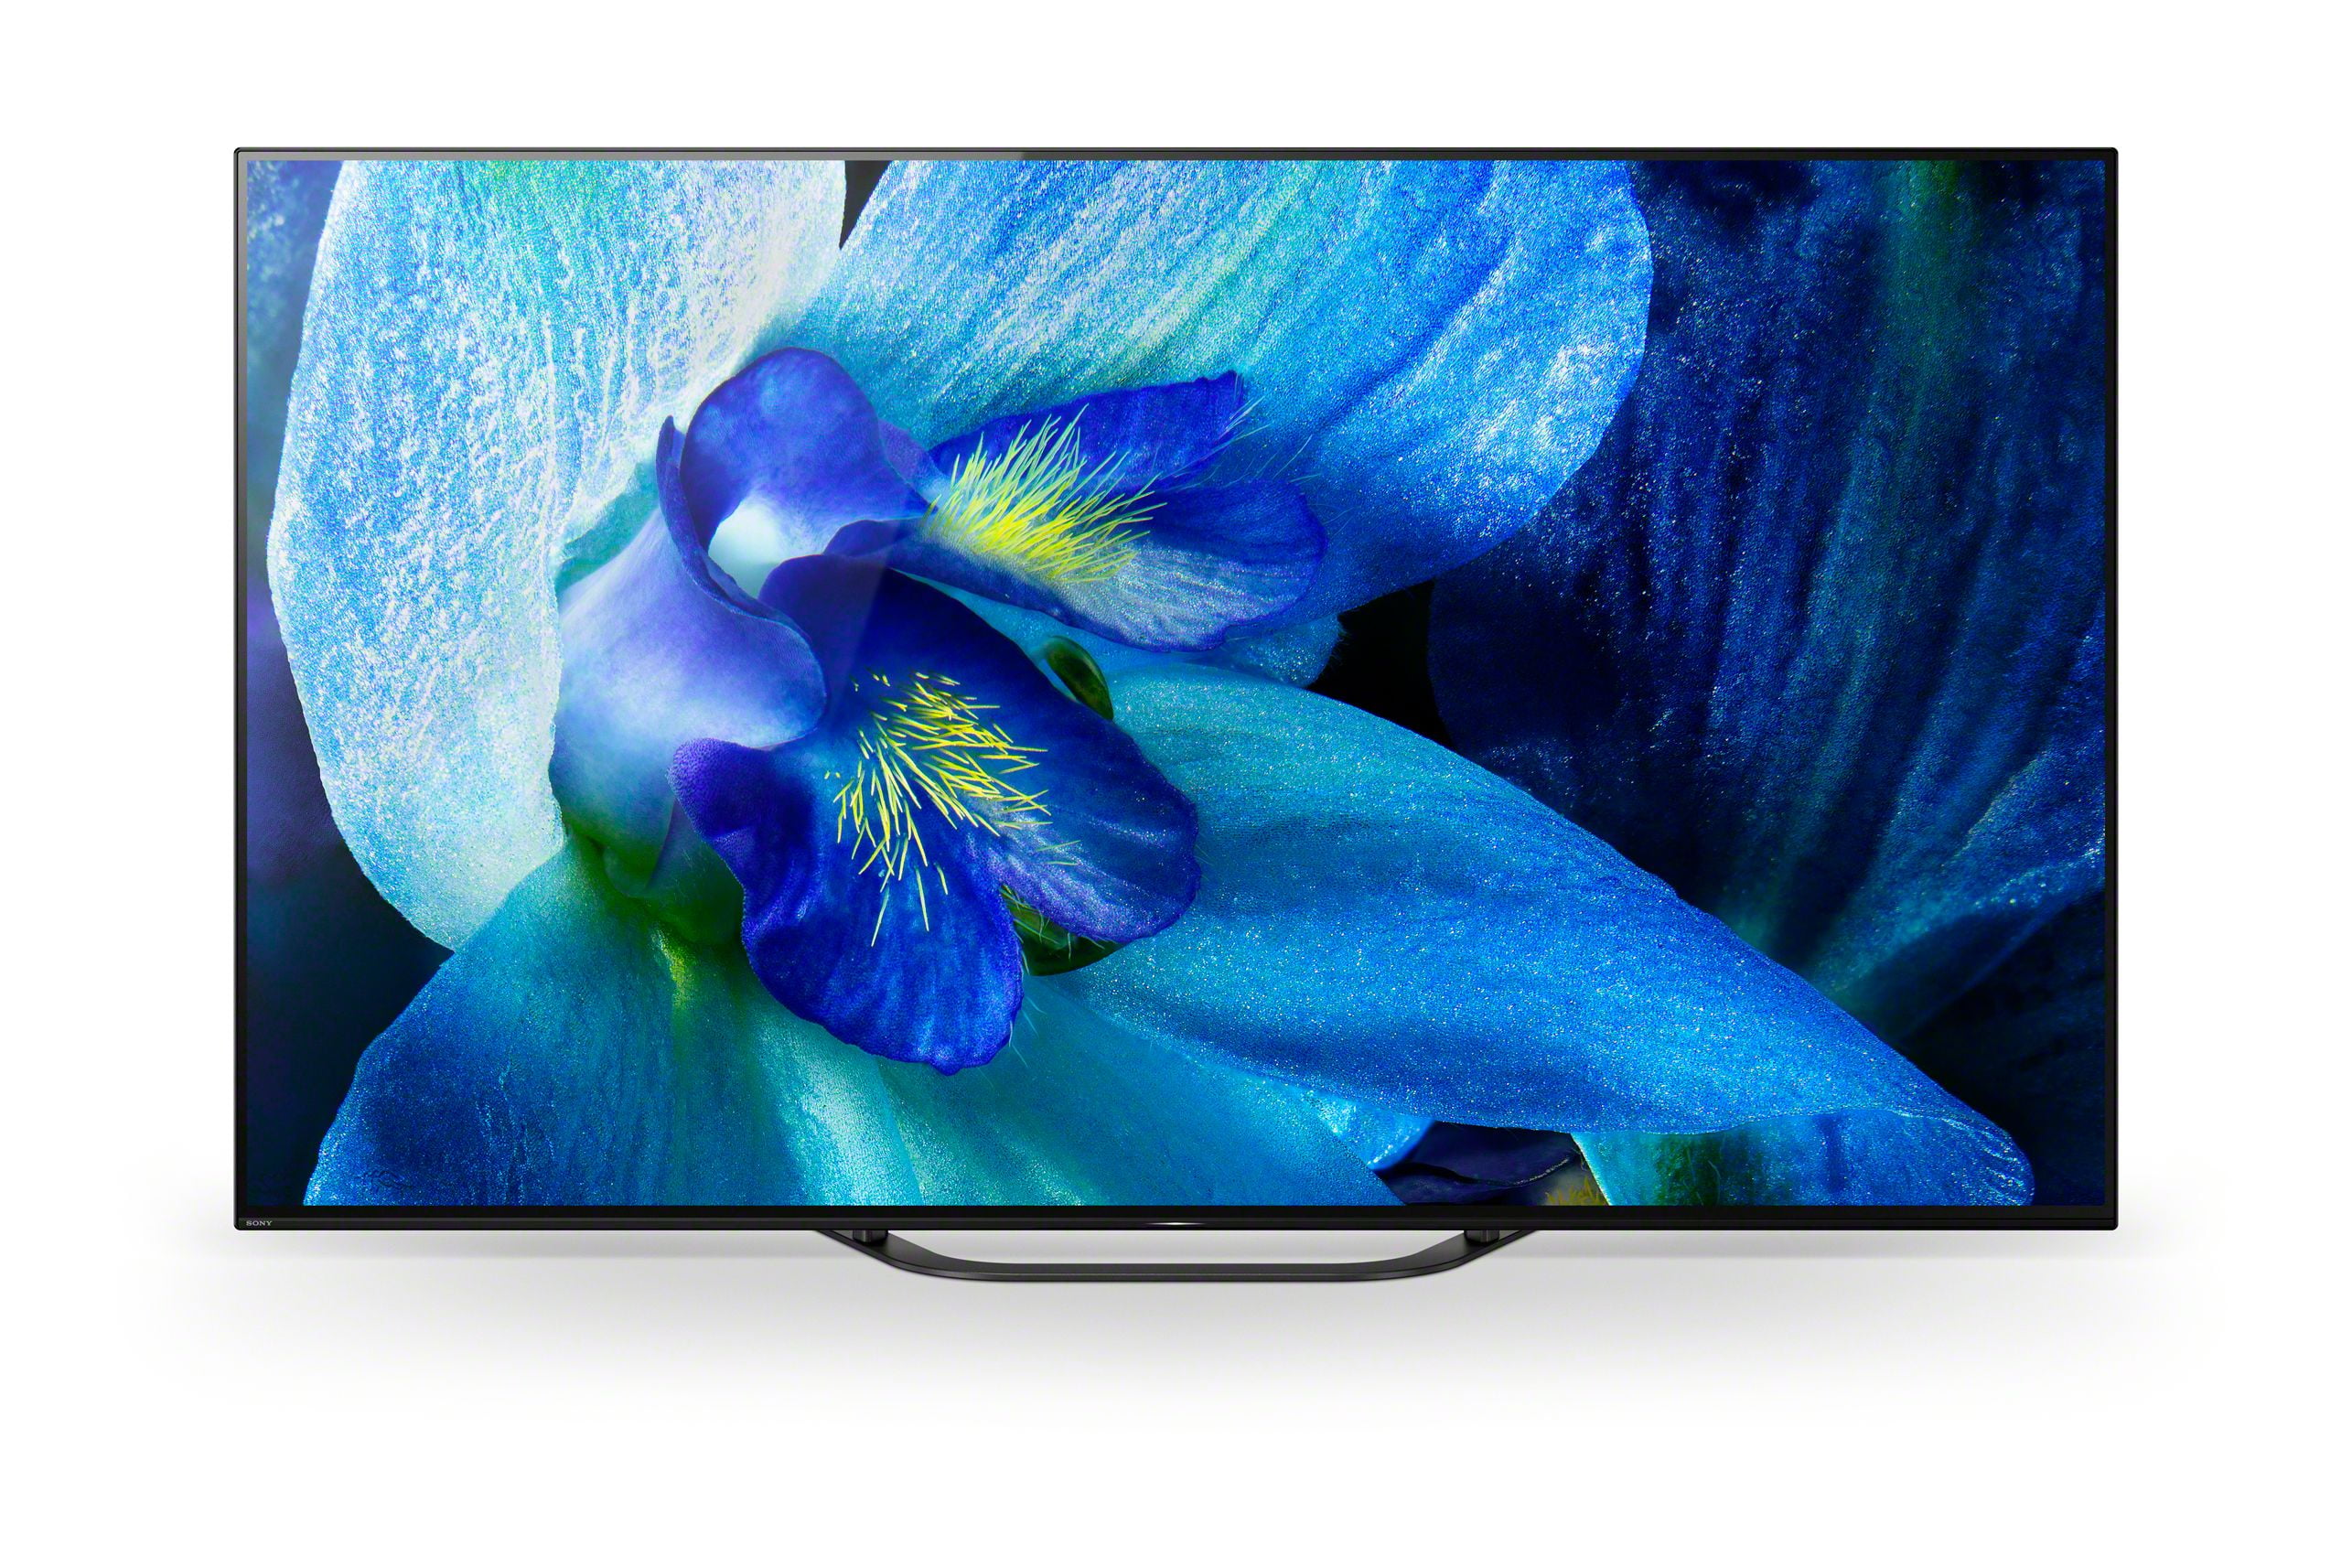 Sony 65" Class 4K UHD OLED Android Smart HDR A8G Series XBR65A8G - Walmart.com